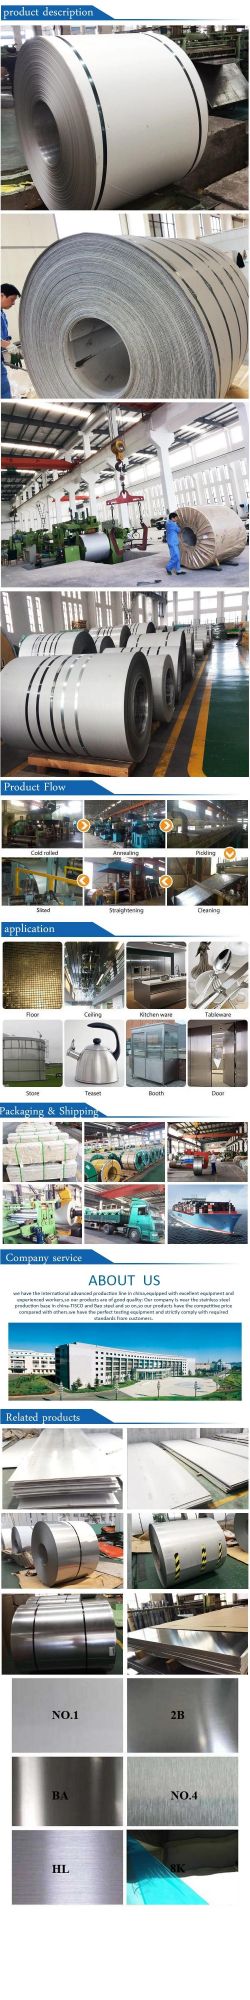 254smo 1.4529 430 409 Stainless Steel Plate/Sheet/Coil/Strip/AISI 201 304L 316 420 DIN 1.4305 304 Stainless Steel Coil Manufacturers Price